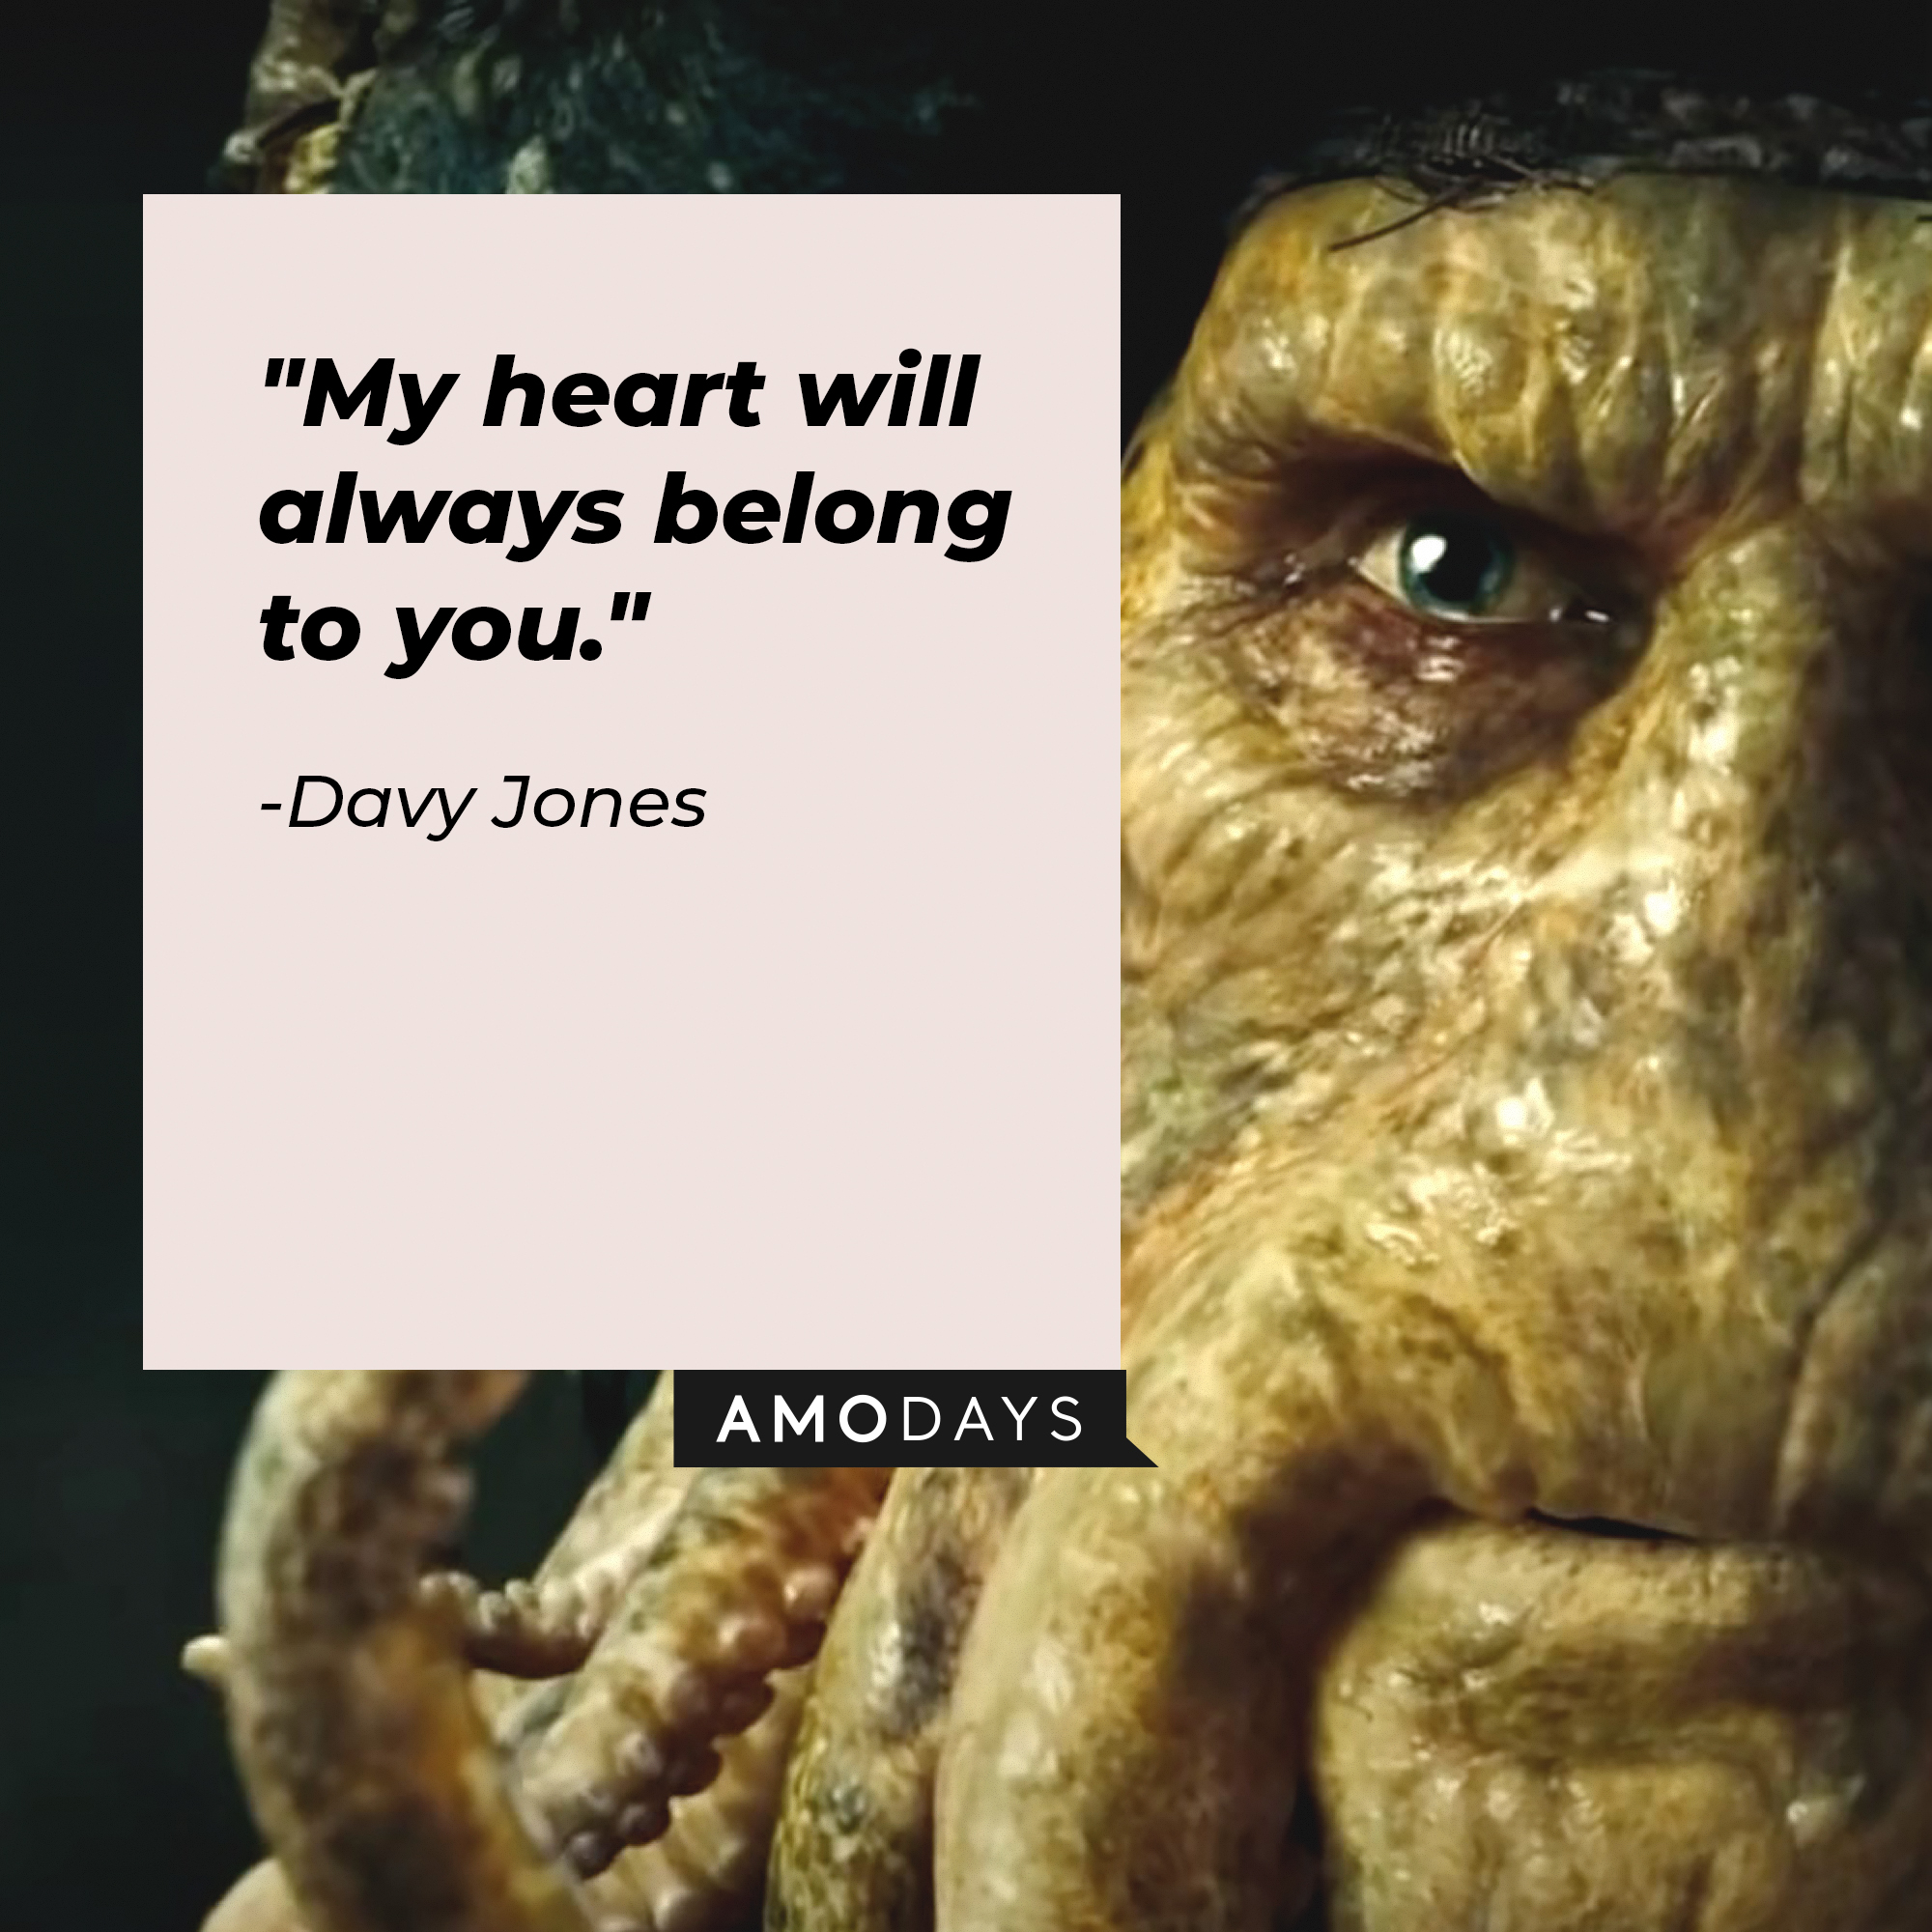 Davy Jones's quotes: "My heart will always belong to you." | Image: AmoDays